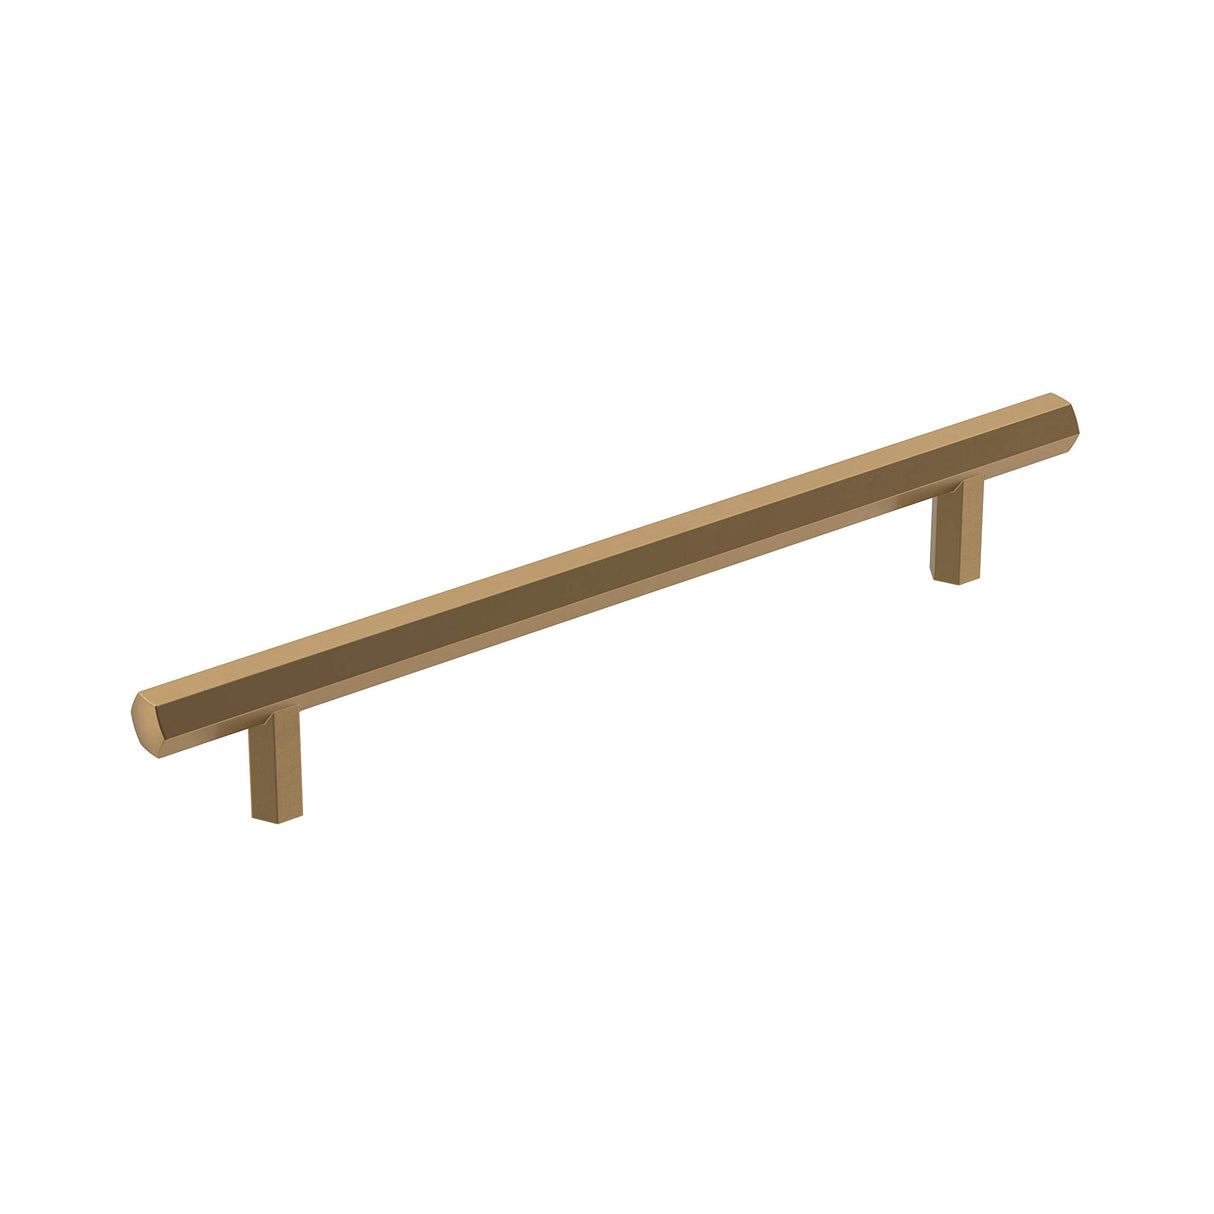 Amerock Cabinet Pull Champagne Bronze 6-5/16 inch (160 mm) Center-to-Center Caliber 1 Pack Drawer Pull Cabinet Handle Cabinet Hardware